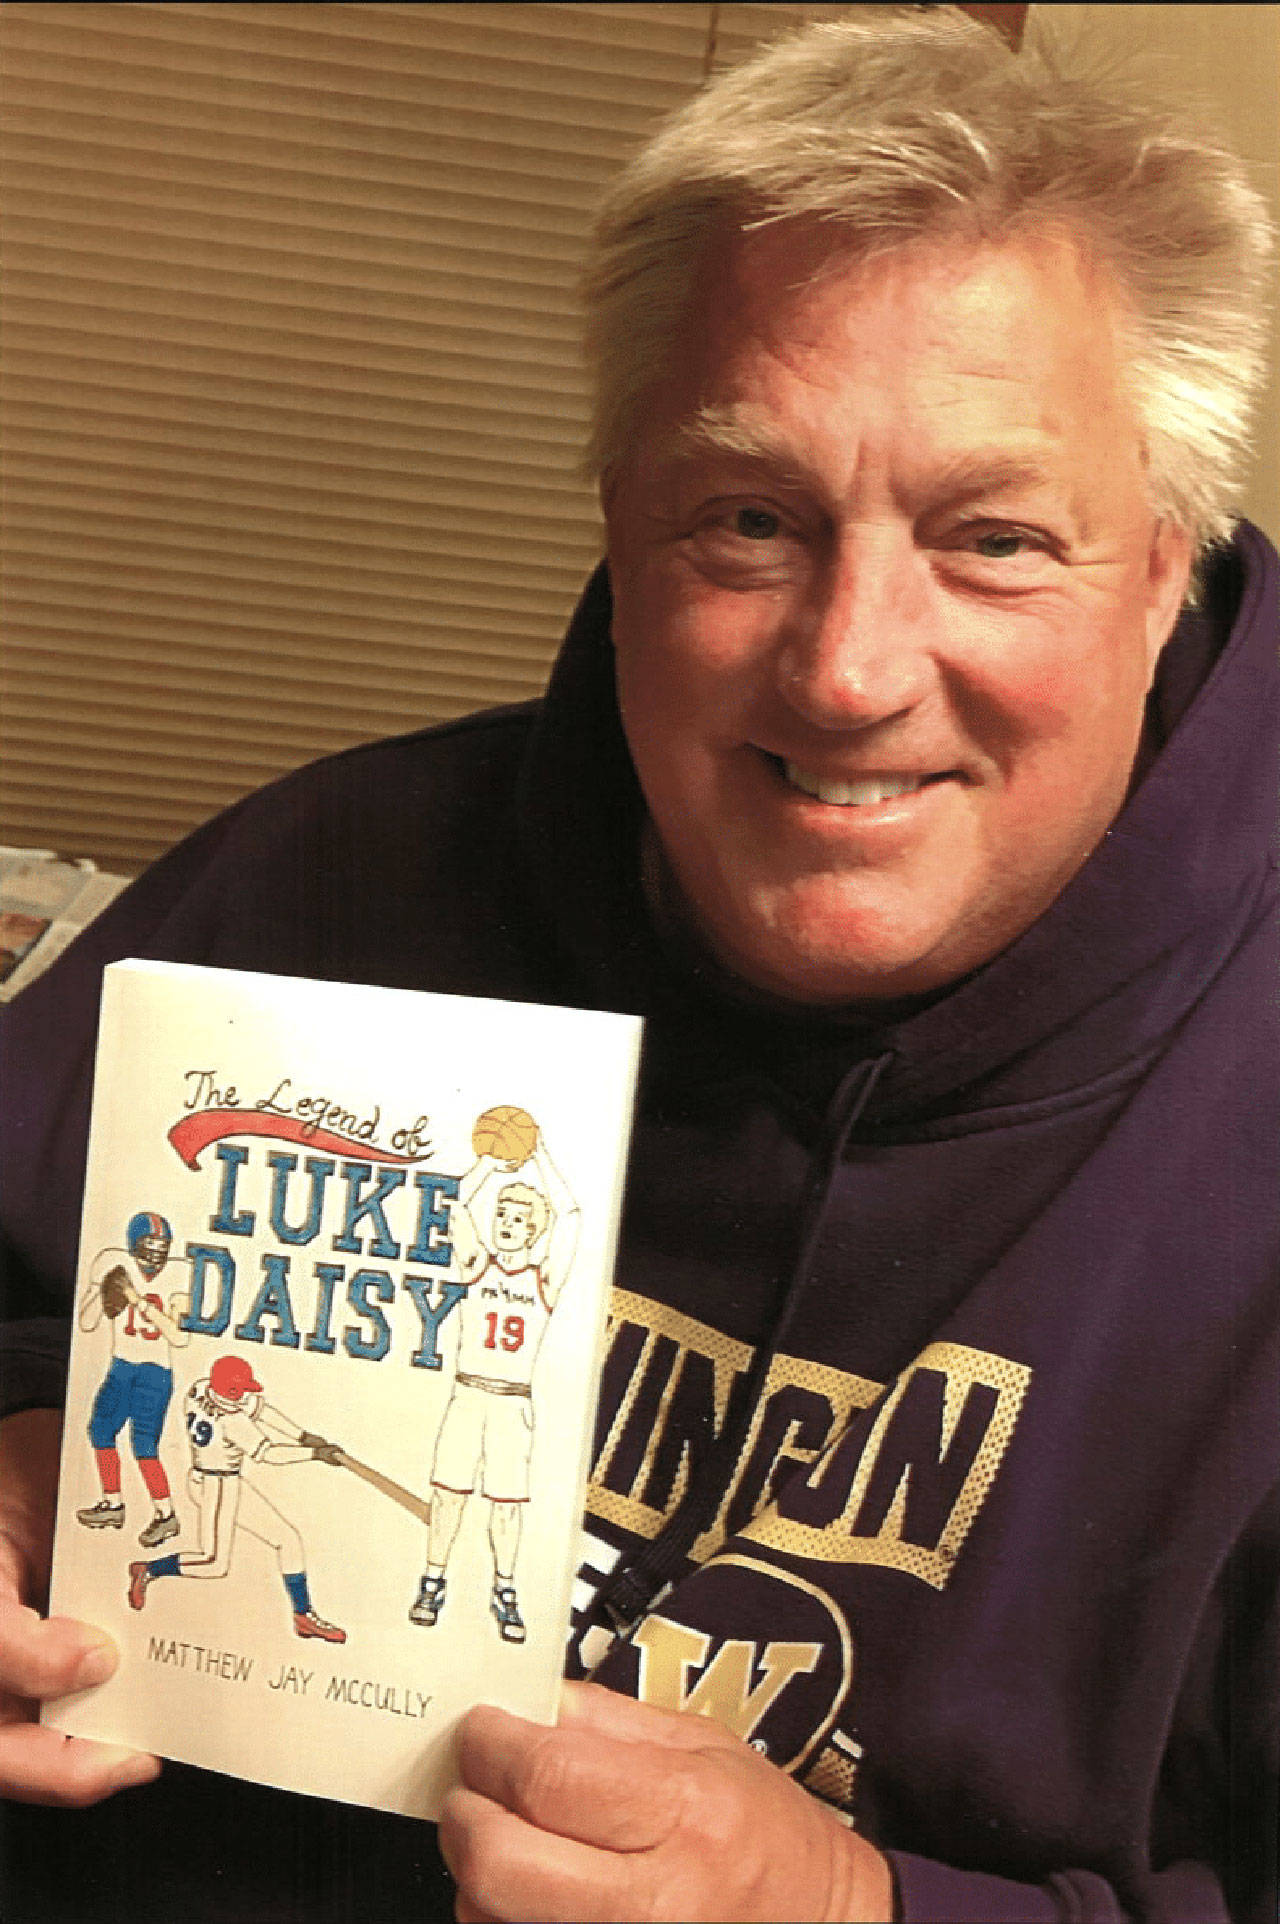 courtesy photo / Courier-Herald
Enumclaw author Matthew McCully holds a copy of his 2019 book “The Legend of Luke Daisy”.